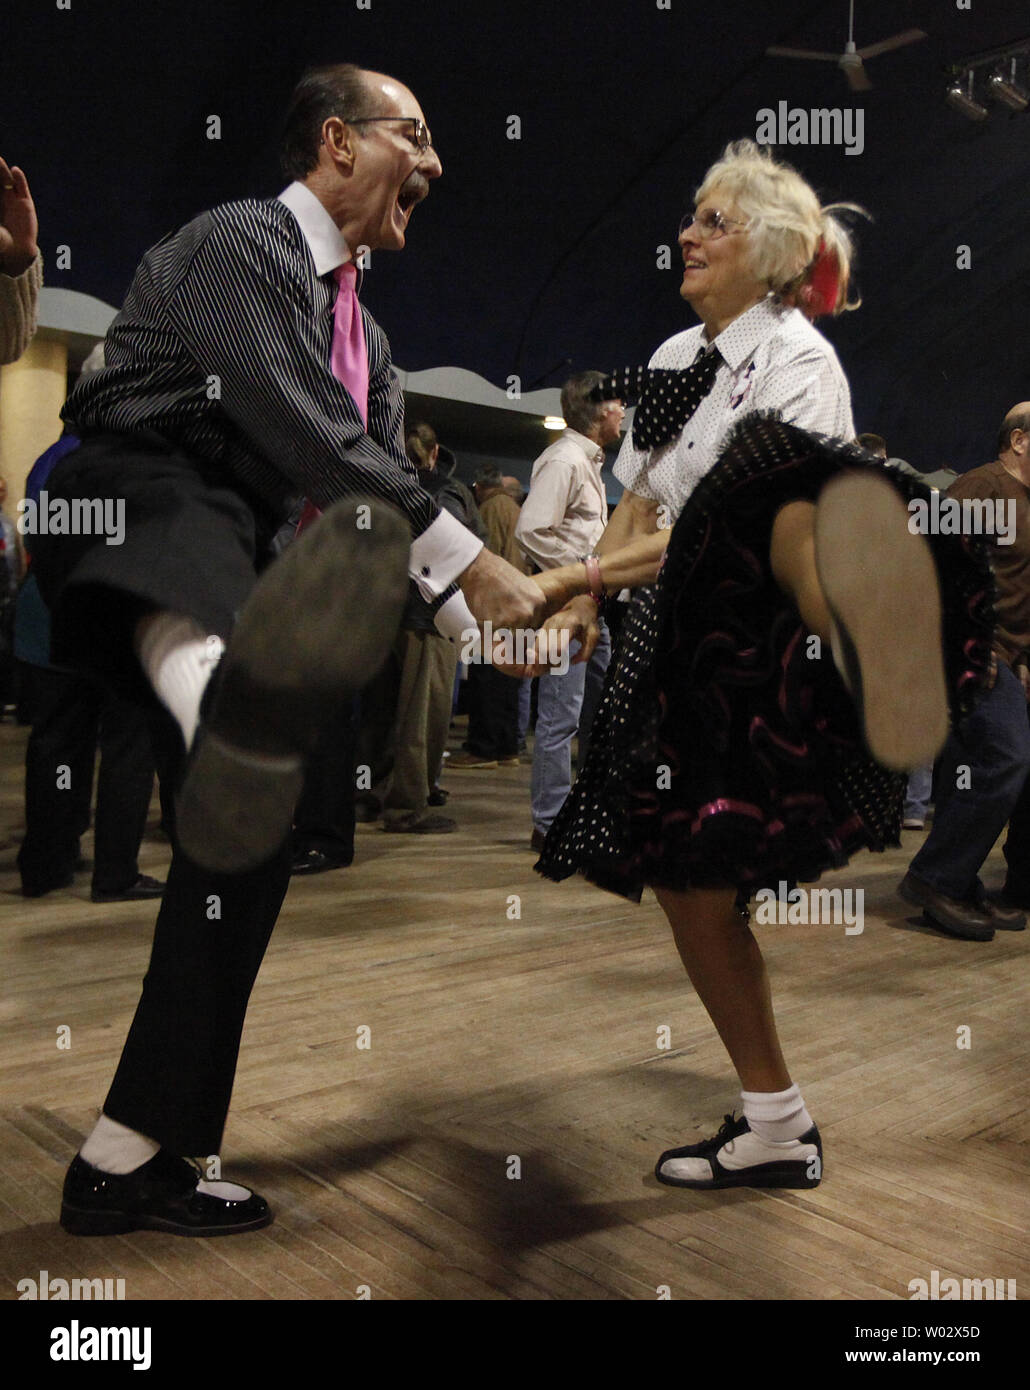 Jan (L) and Dan Hanson of Cedar Falls, Iowa dance before a tribute concert memorializing Buddy Holly, J.P. 'The Big Bopper' Richardson and Ritchie Valens at the Surf Ballroom in Clear Lake, Iowa on February 2, 2009. The three rock 'n' roll pioneers played their last show at the Surf Ballroom 50 years ago to the day. Singer Don McLean coined the phrase 'the day the music died' in his hit song 'American Pie' referring to the plane crash that killed the three stars in the early morning hours of February 3, 1959.  UPI/Brian Kersey Stock Photo